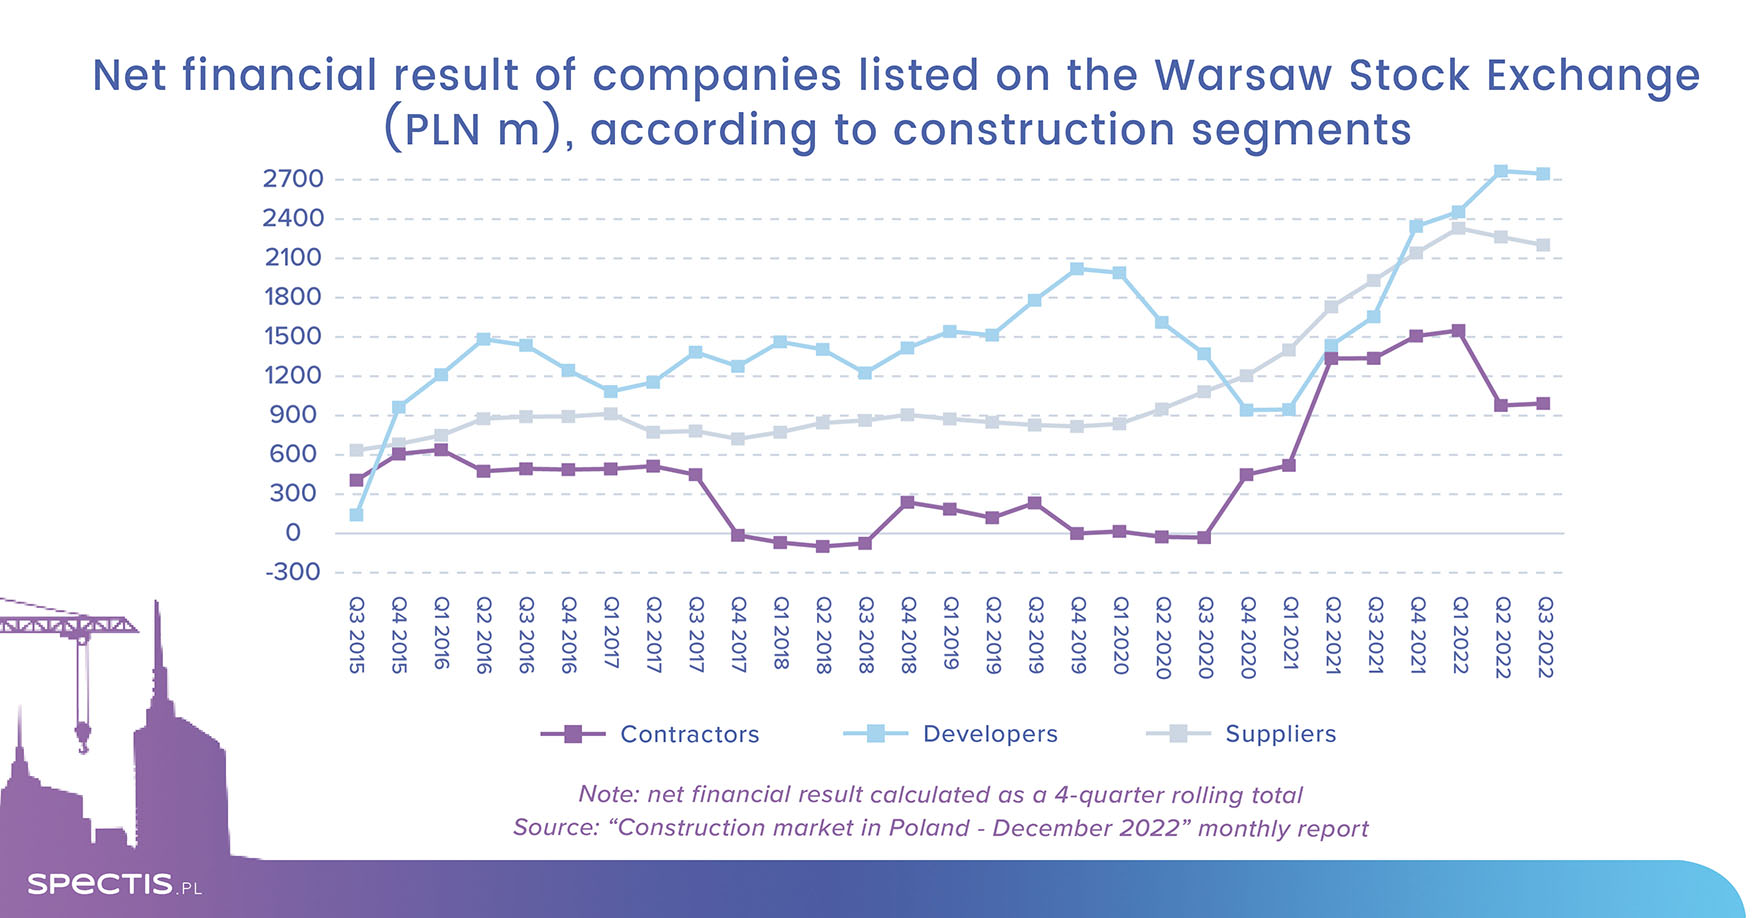 WSE-listed construction companies report lower profits as of Q3 2022